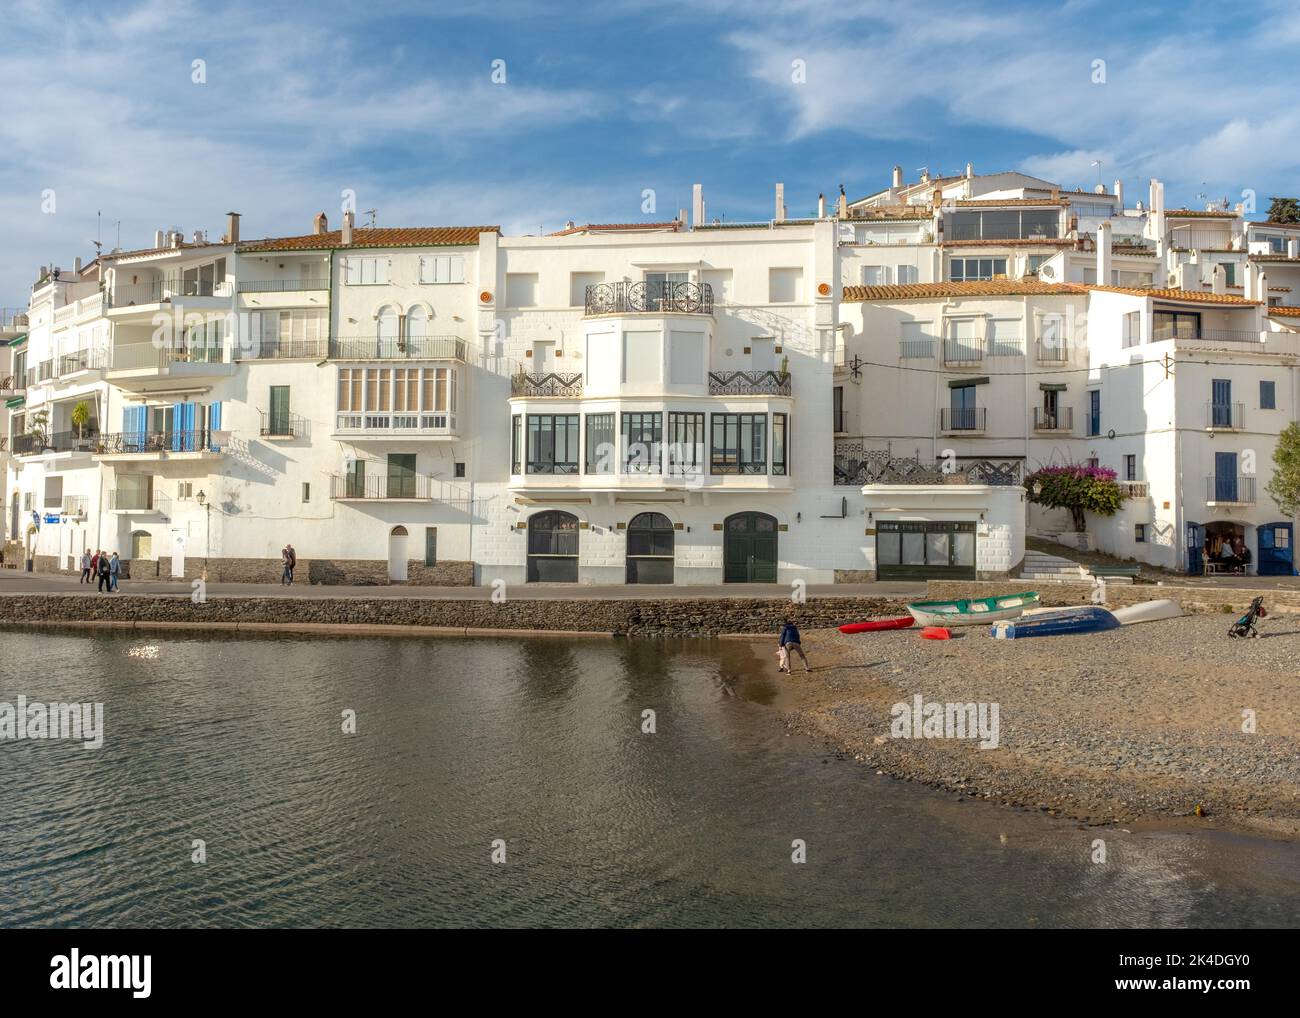 Cadaqués, Spain - February 25, 2022: View on Catalan modernist buildings. Photo taken in winter, with some unrecognizable persons walking along the se Stock Photo